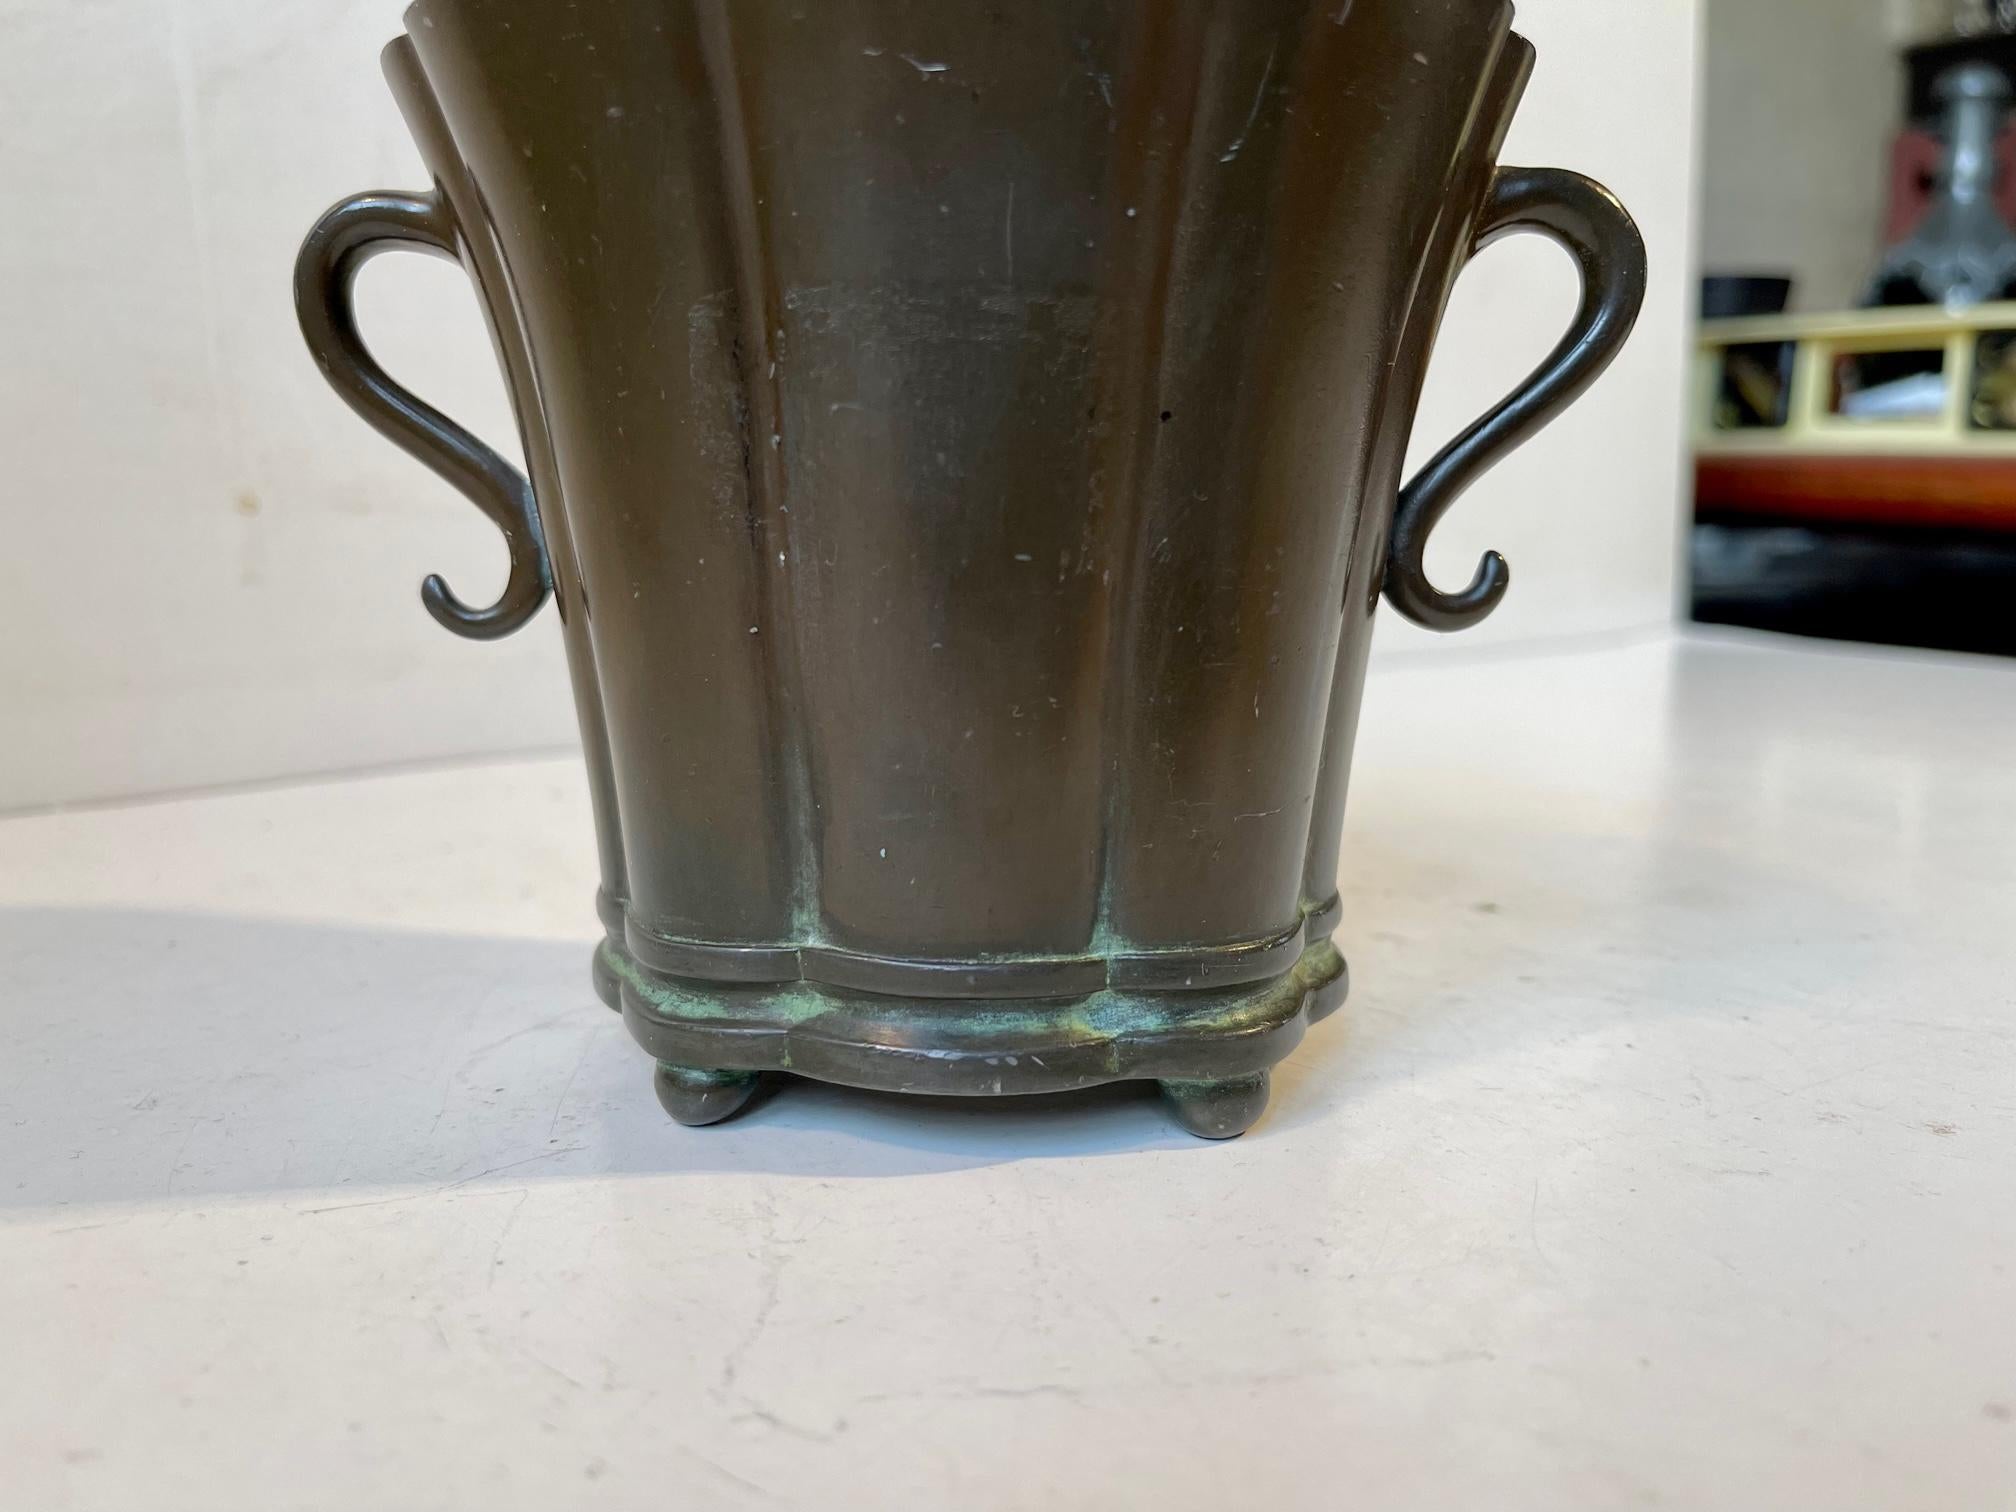 Small curvy disco-metal planter with a green patina. Distinct Art Deco styling. Designed and made by Just Andersen in Denmark circa 1930-40. Design number: D18. Disko-metal is Just Andersen own invention/alloy. Measurements: H: 10 cm, W: 11 cm